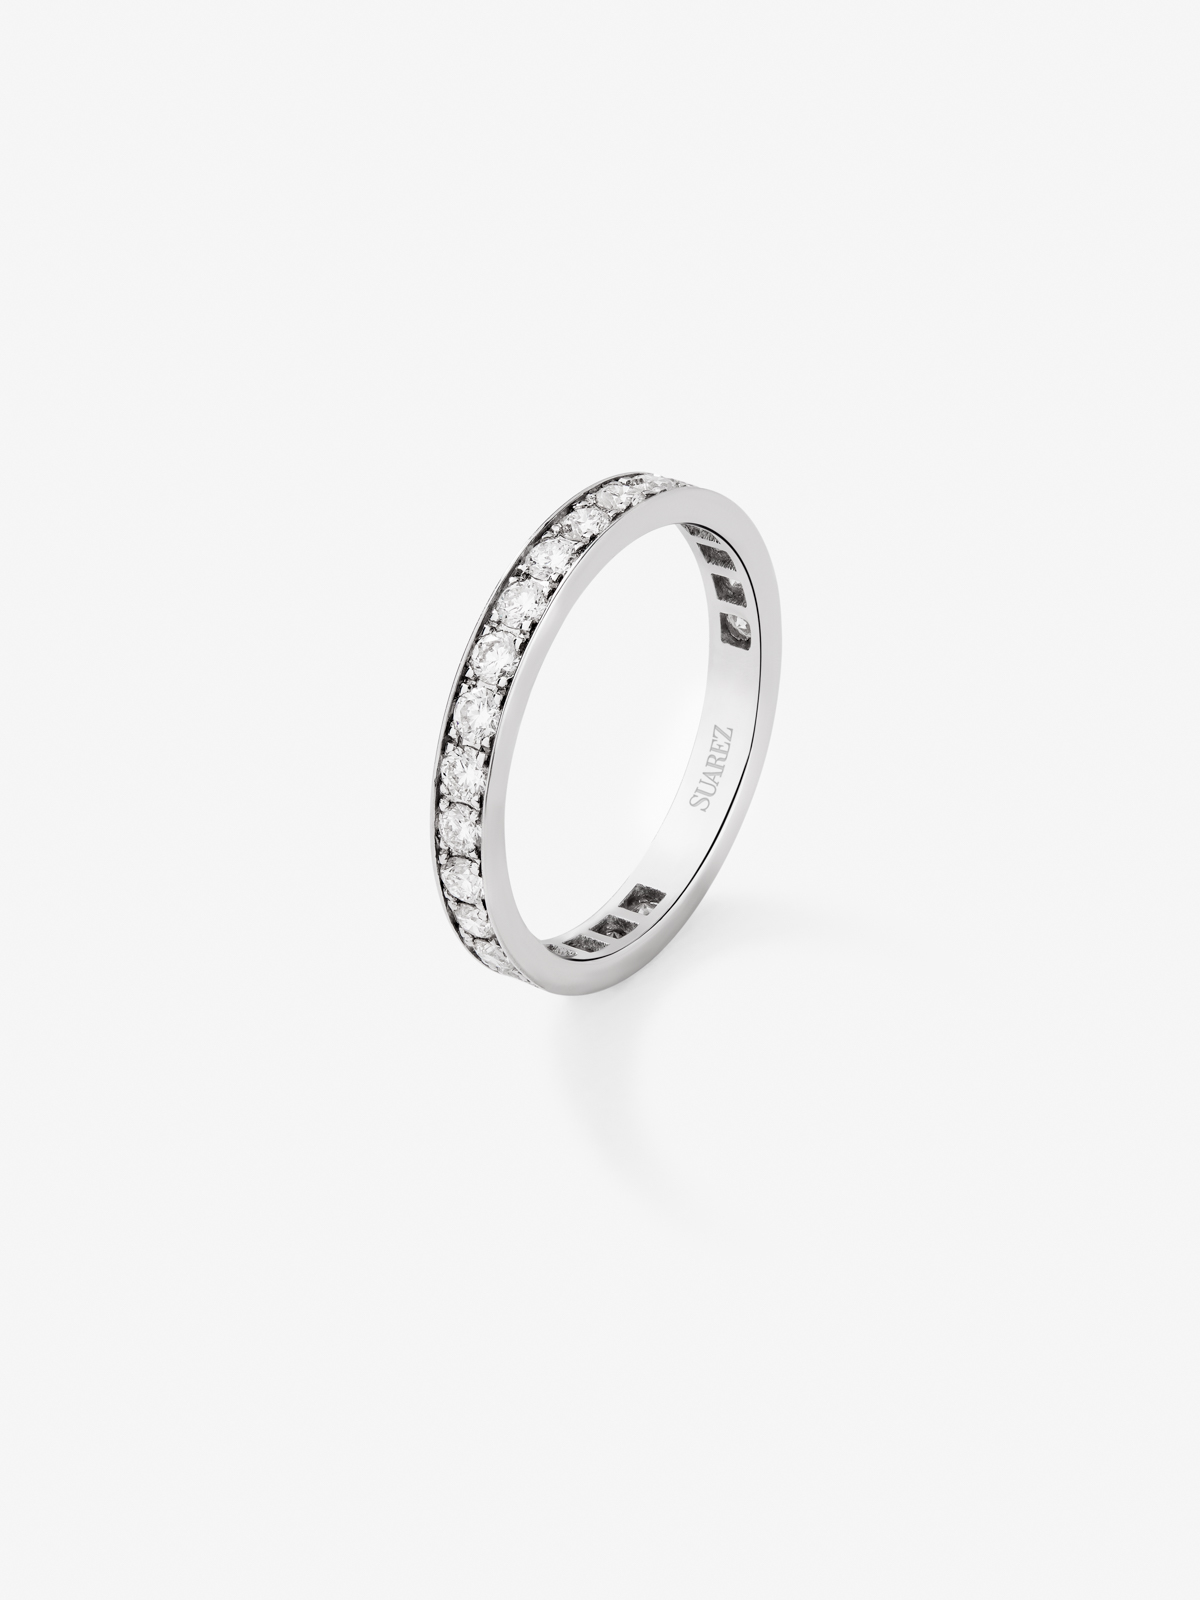 White Gold Commitment Ring with Diamond